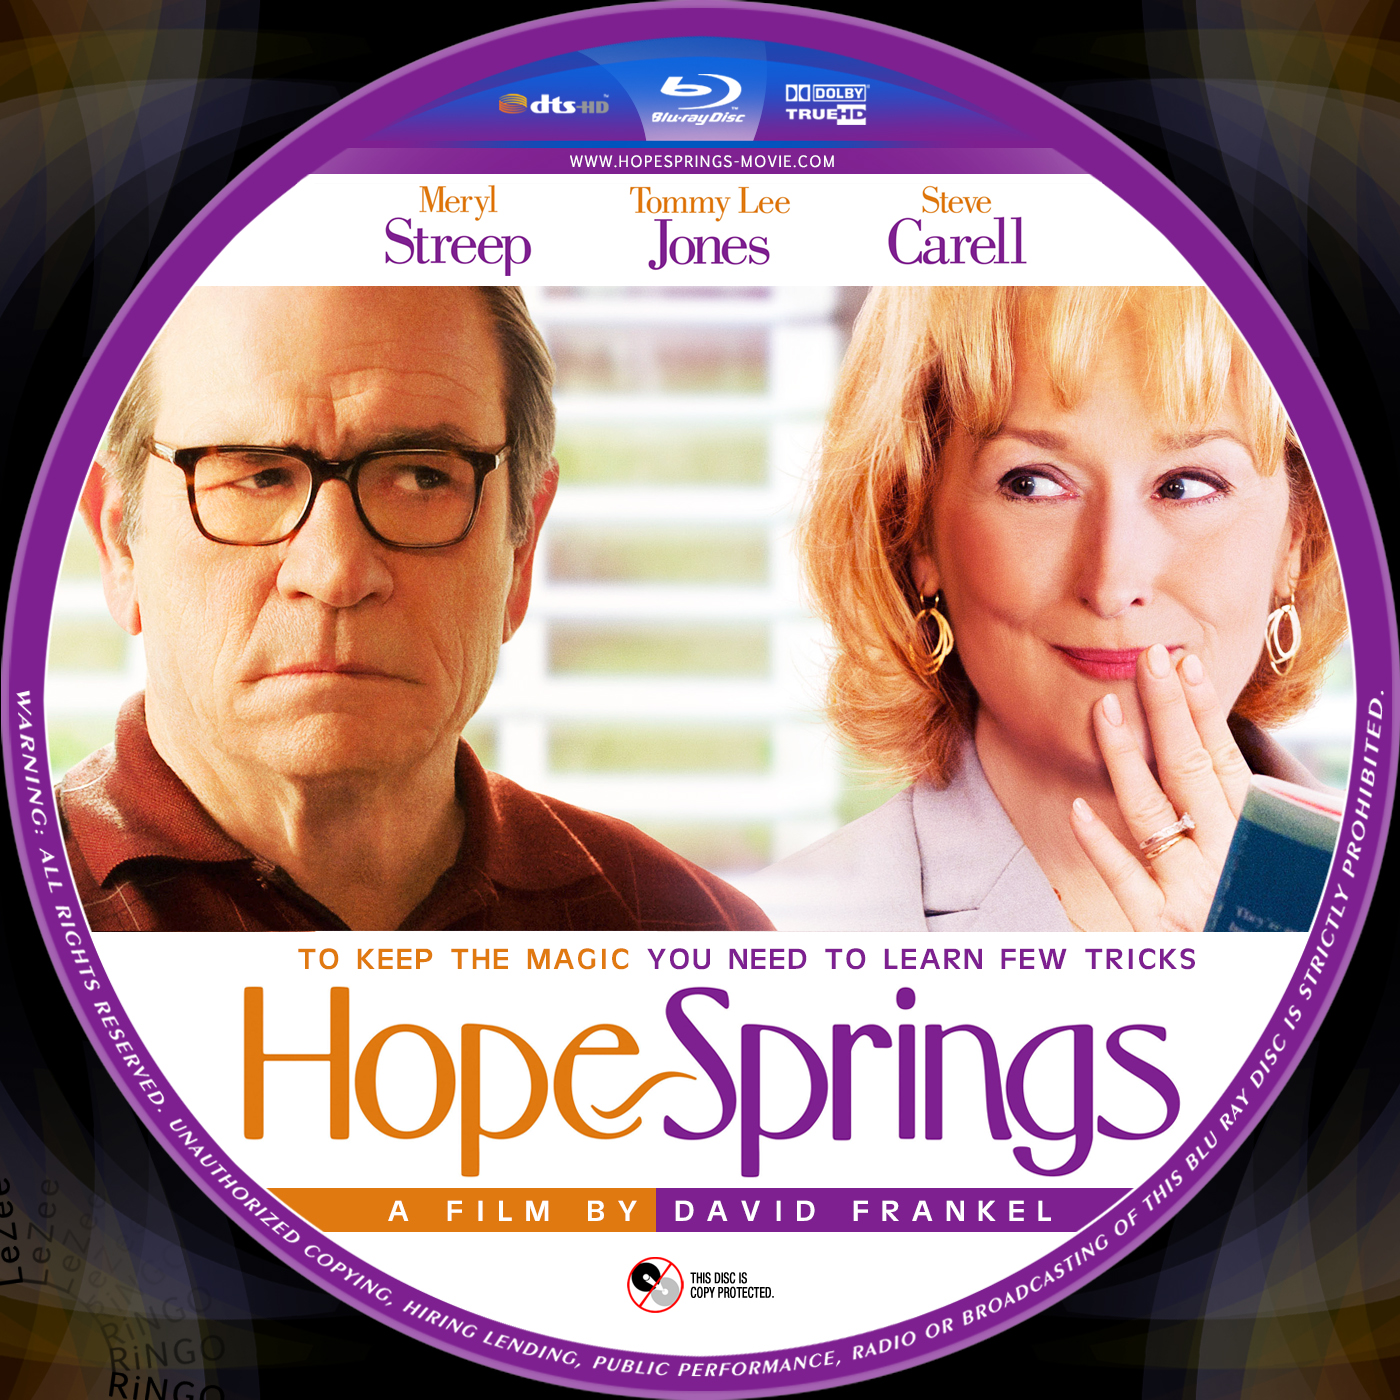 Download Hope Springs 2012 Full Hd Quality